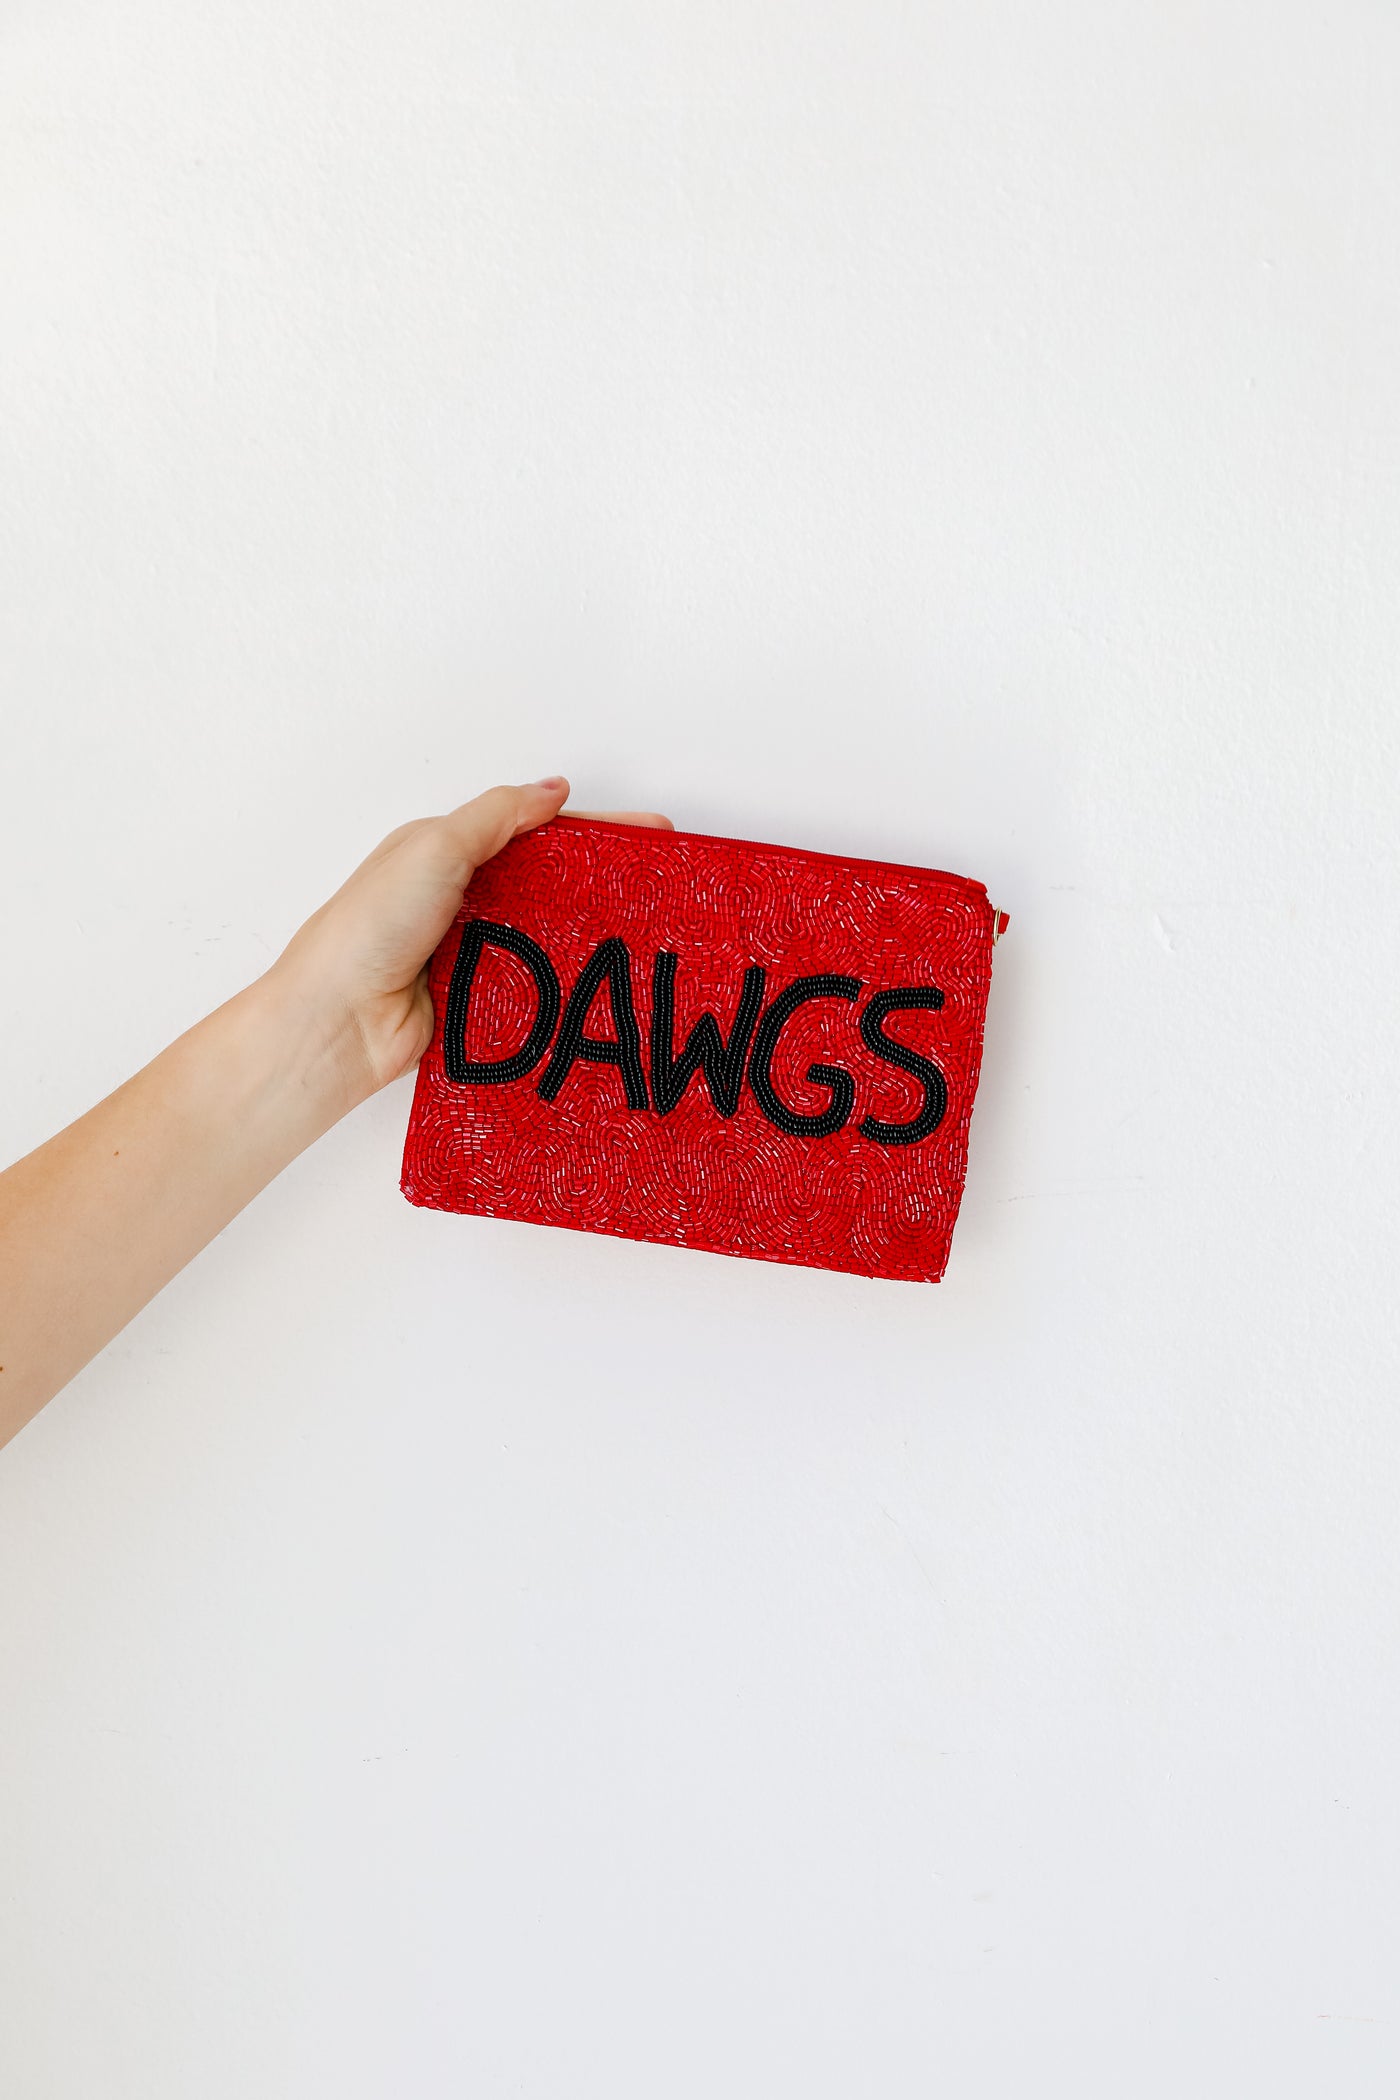 Dawgs Beaded Pouch flat lay